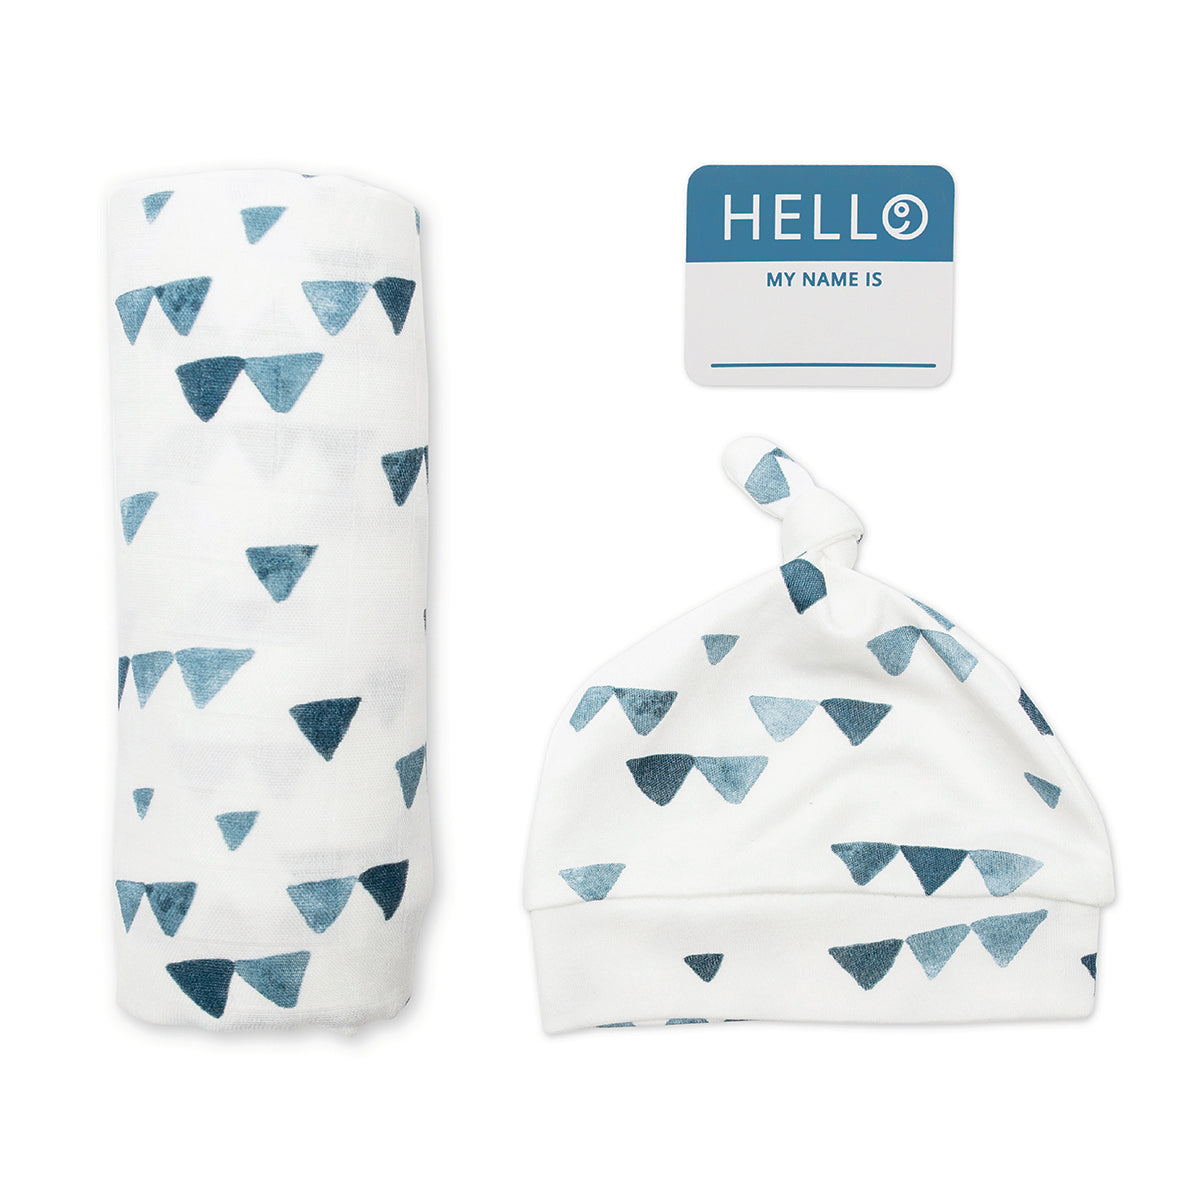 hello world hat, swaddle rolled up, and name tag displayed on a white background